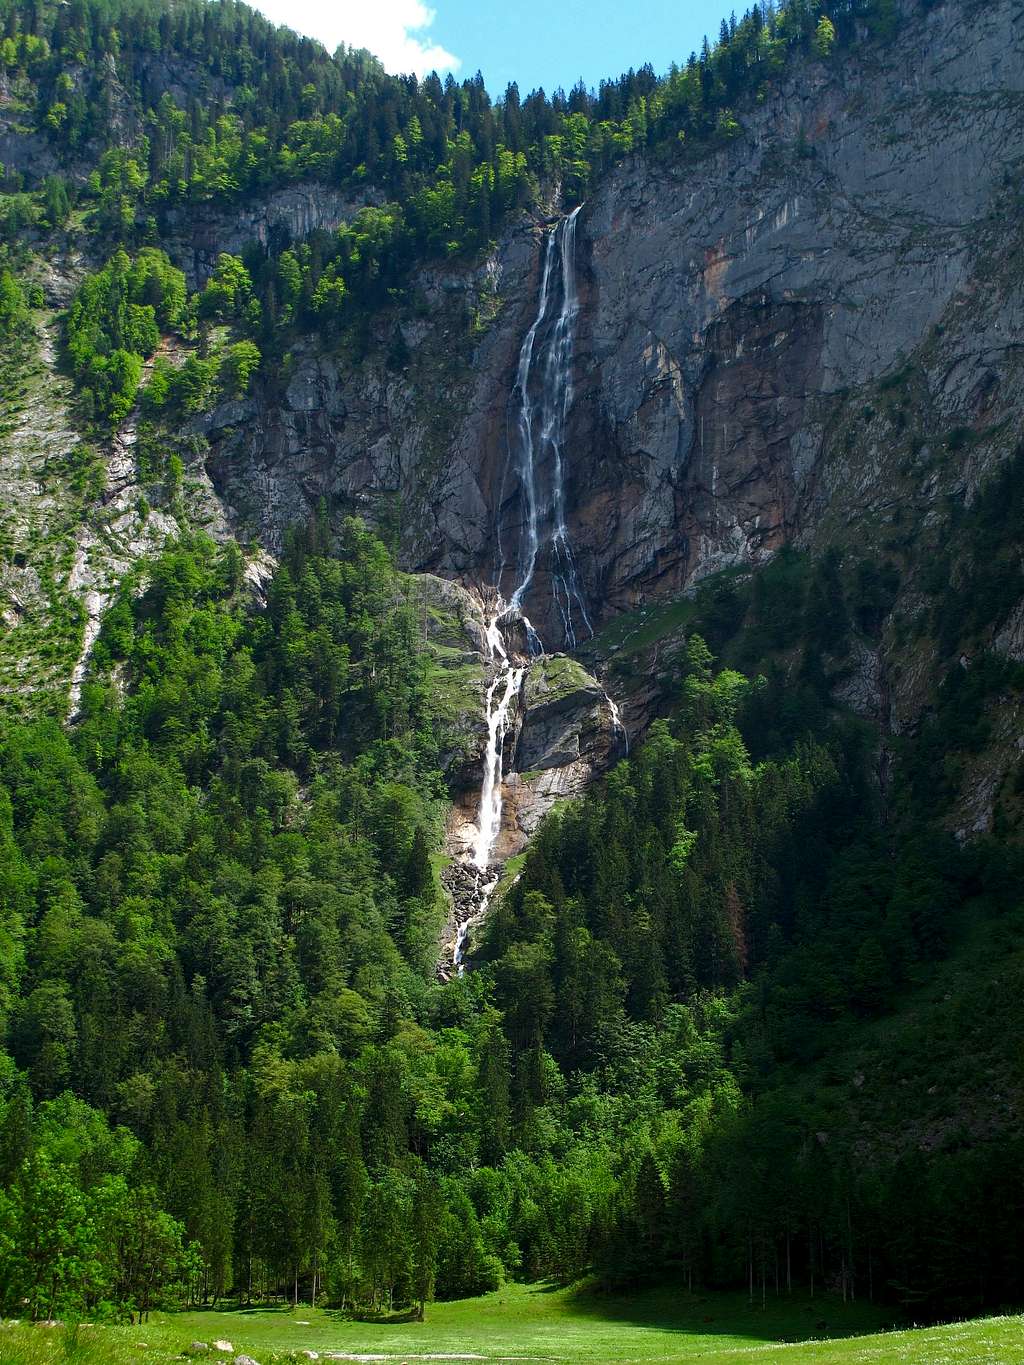 Germany's highest waterfall